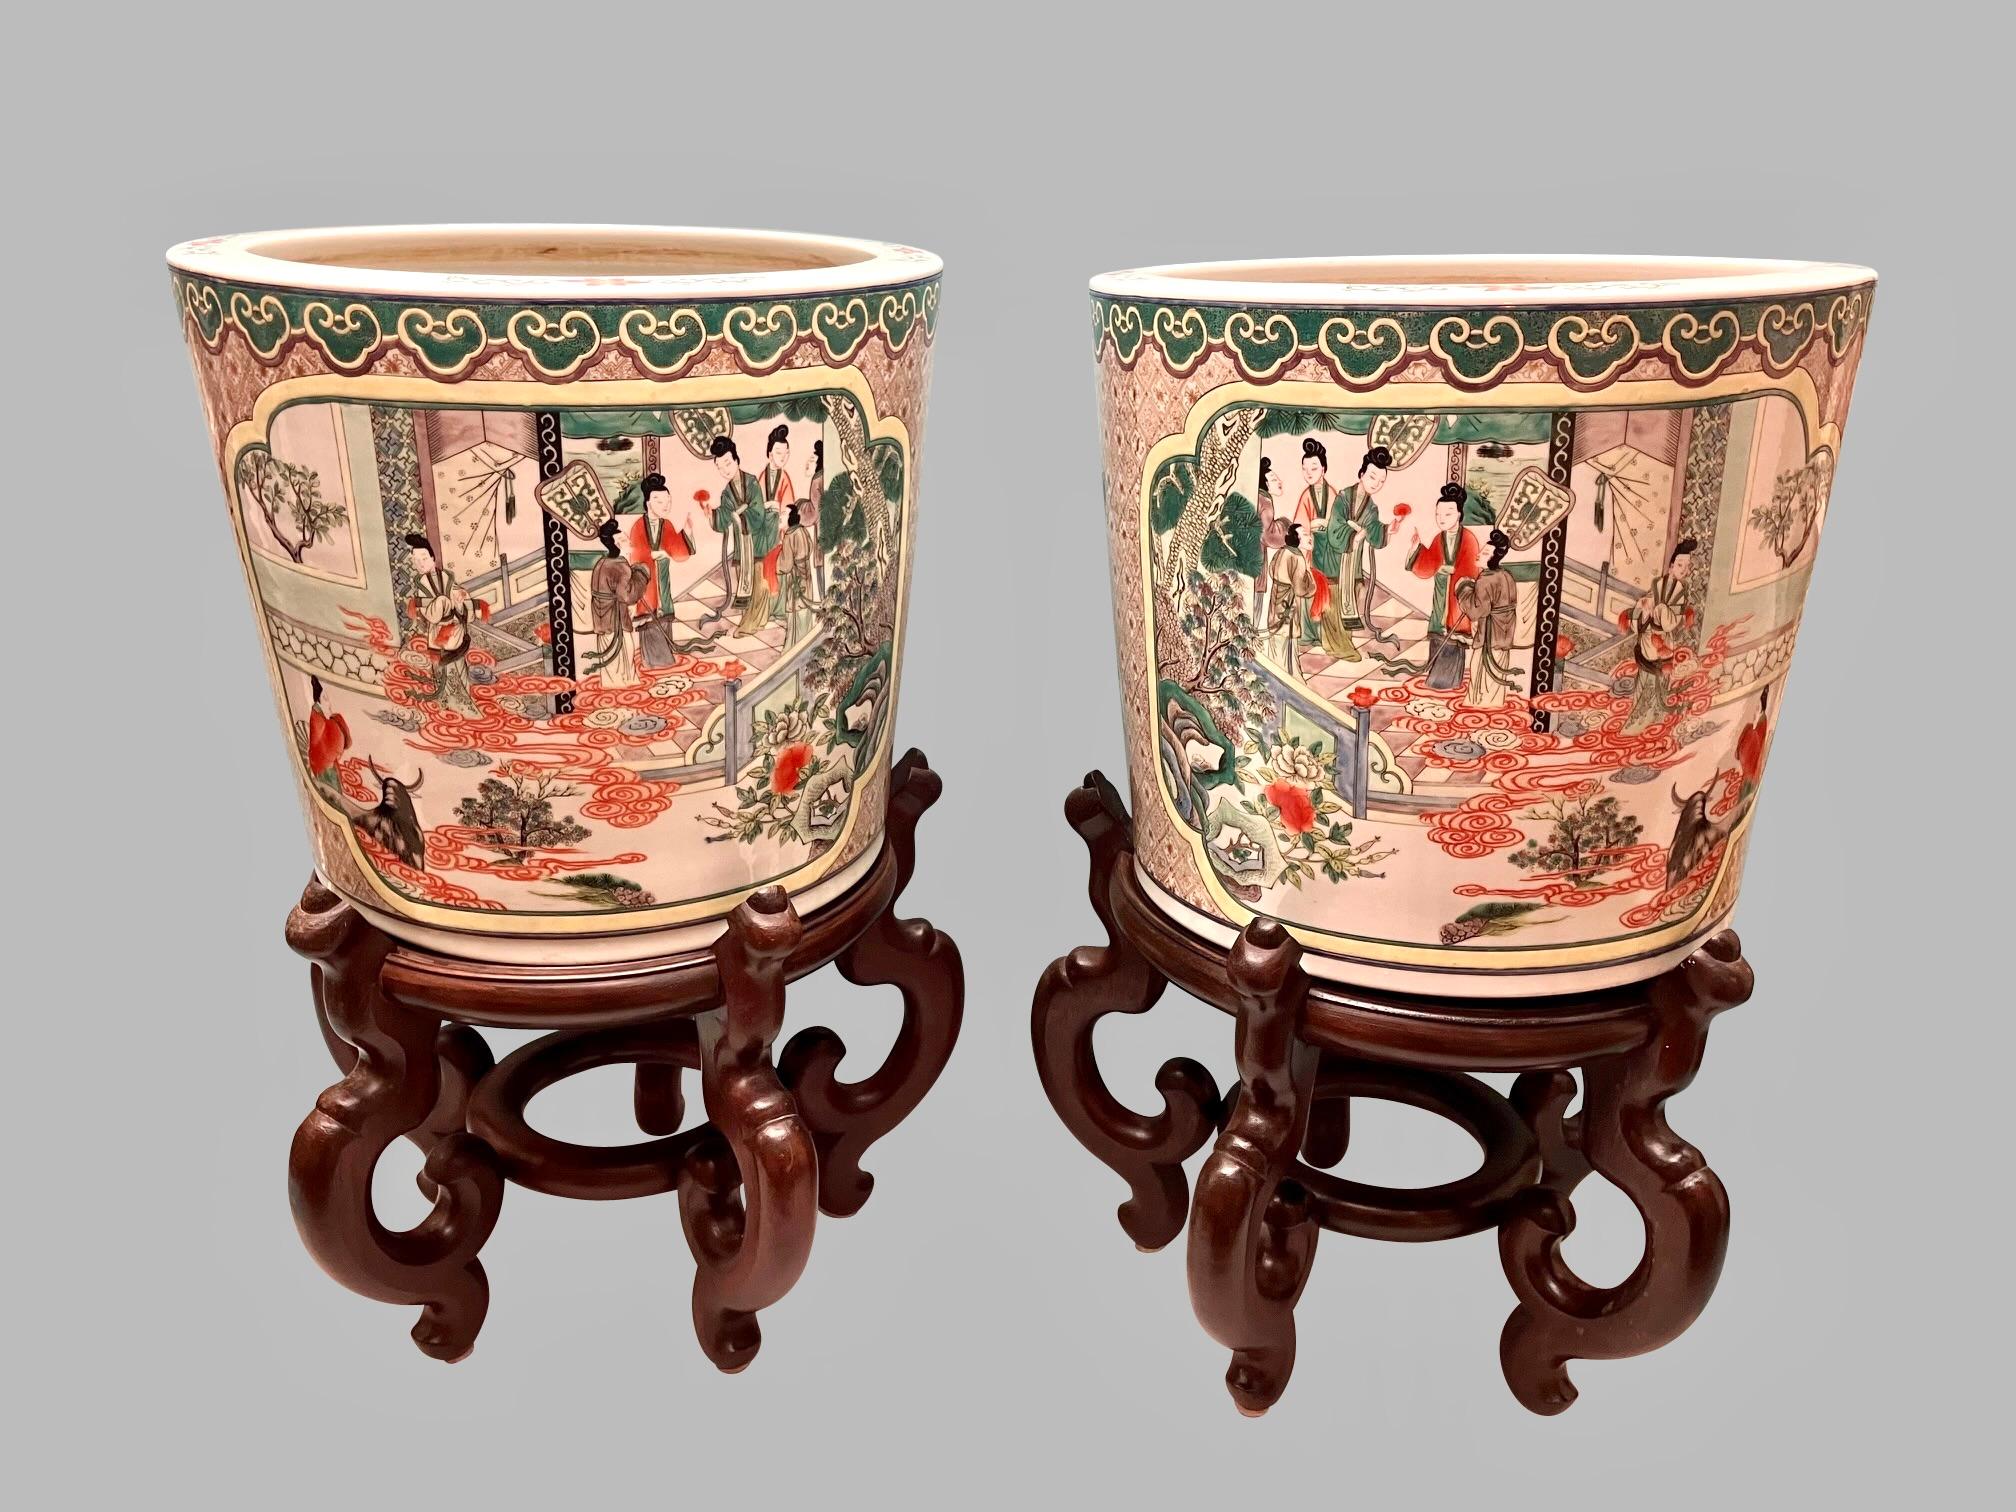 20th Century Pair of Chinese Stoneware Famille Verte Planters or Fishbowls on Hardwood Stands For Sale